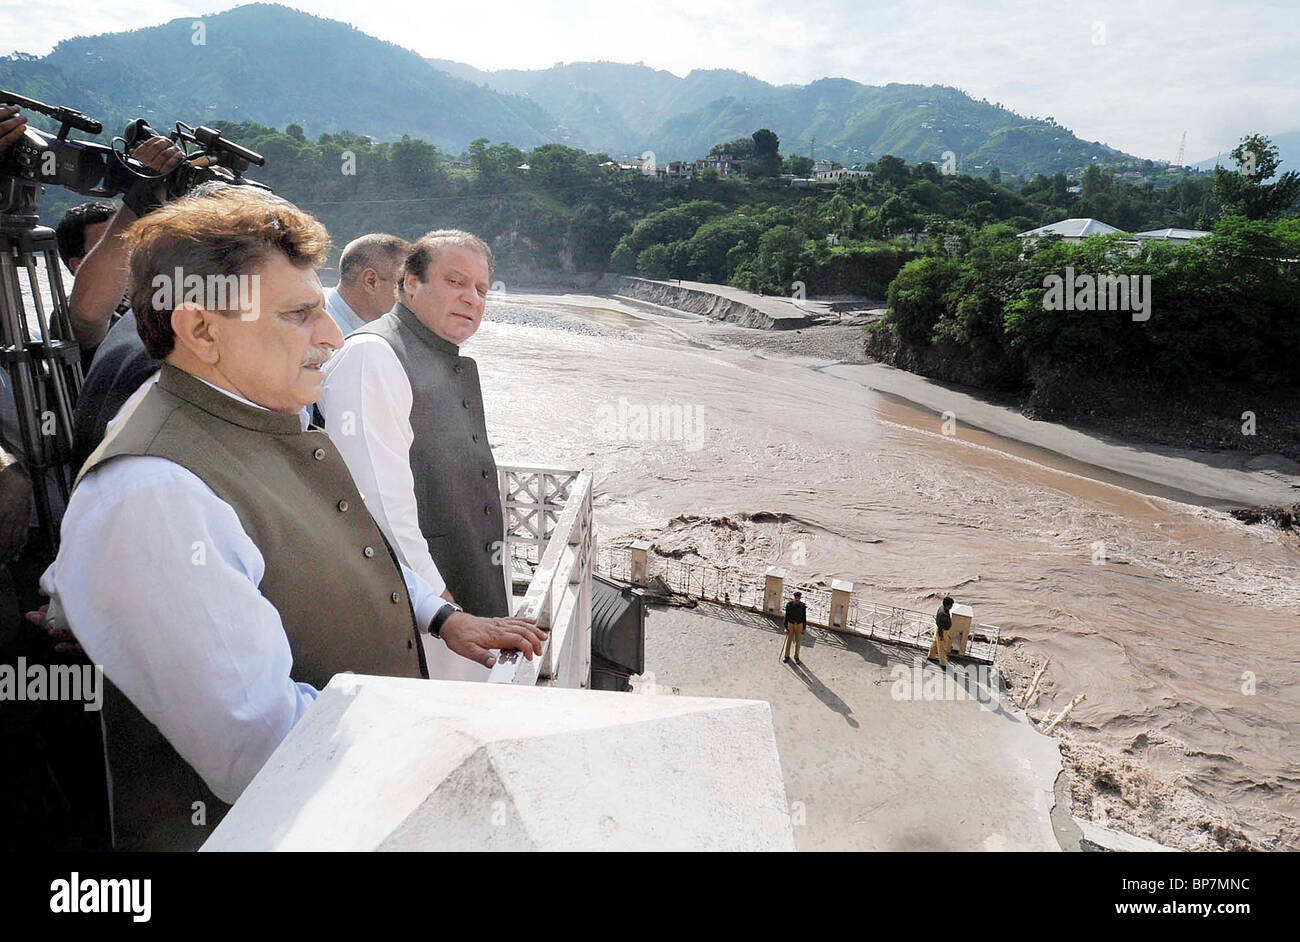 Muslim League (PML-N) Chief, Nawaz Sharif inspects flood affected area during his visits in Muzaffarabad Stock Photo